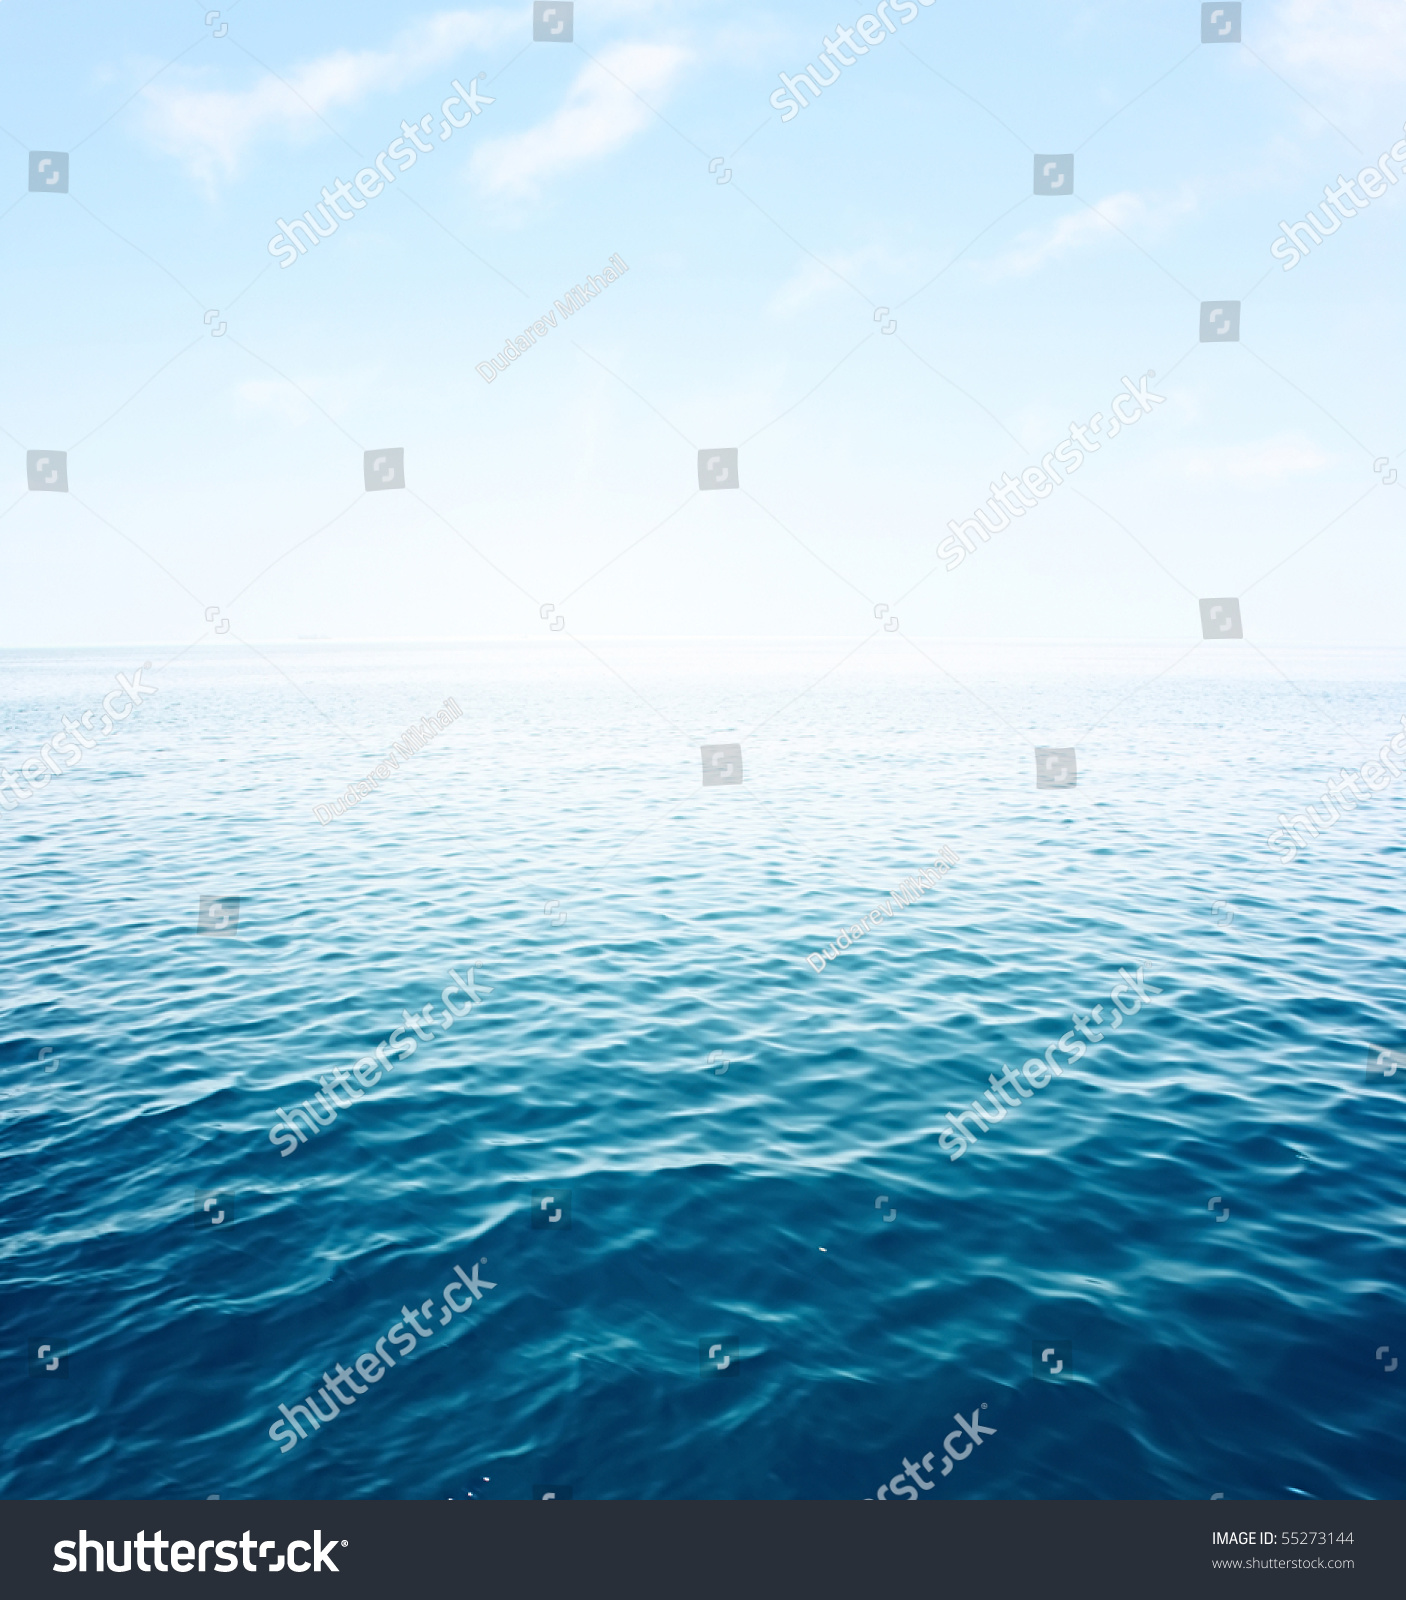 Blue sea with waves and clear blue sky #55273144